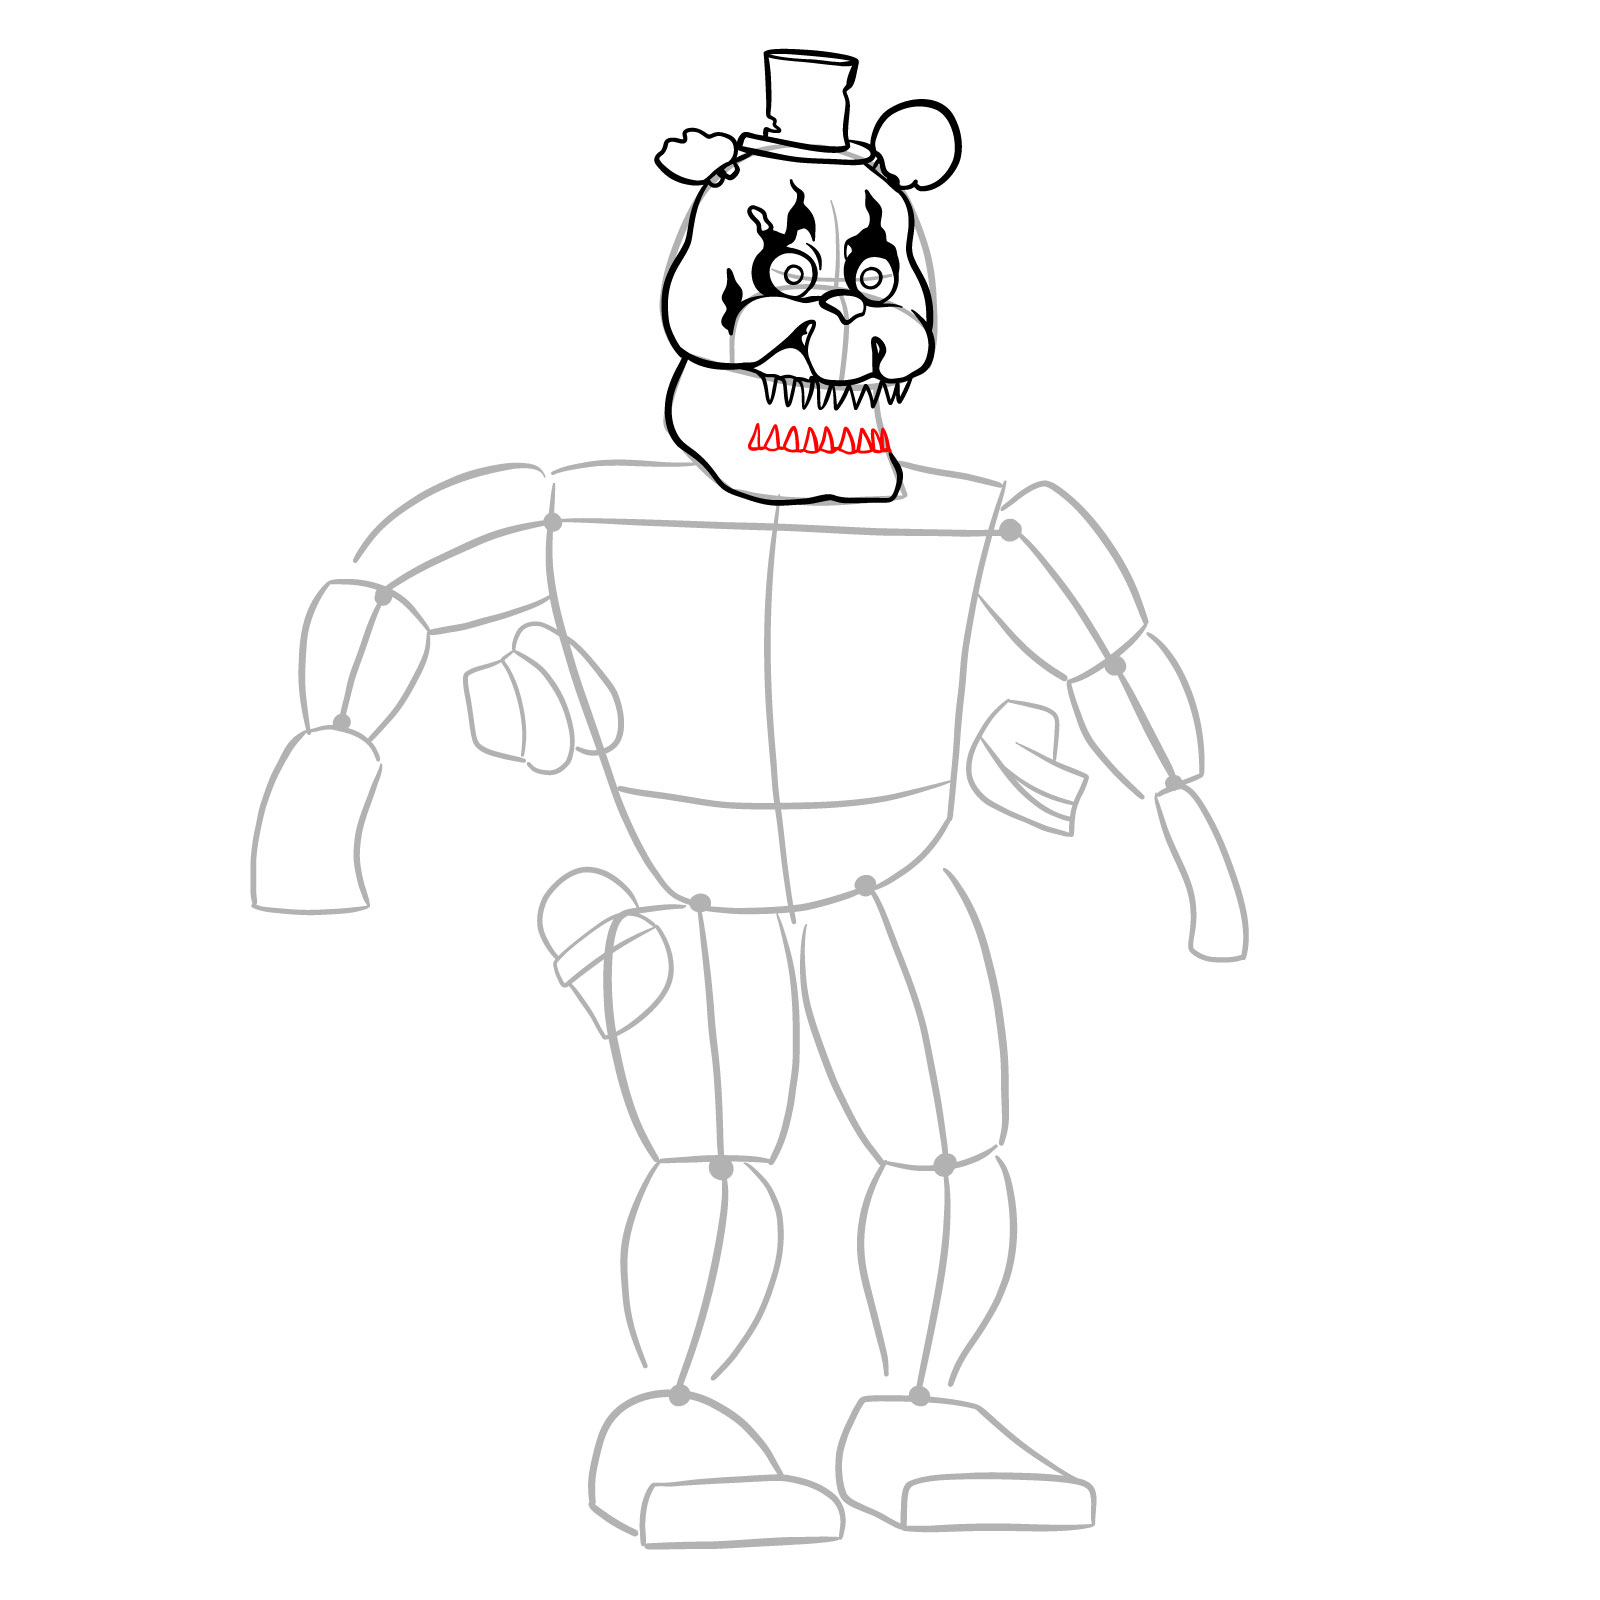 How to draw Nightmare Freddy - step 12